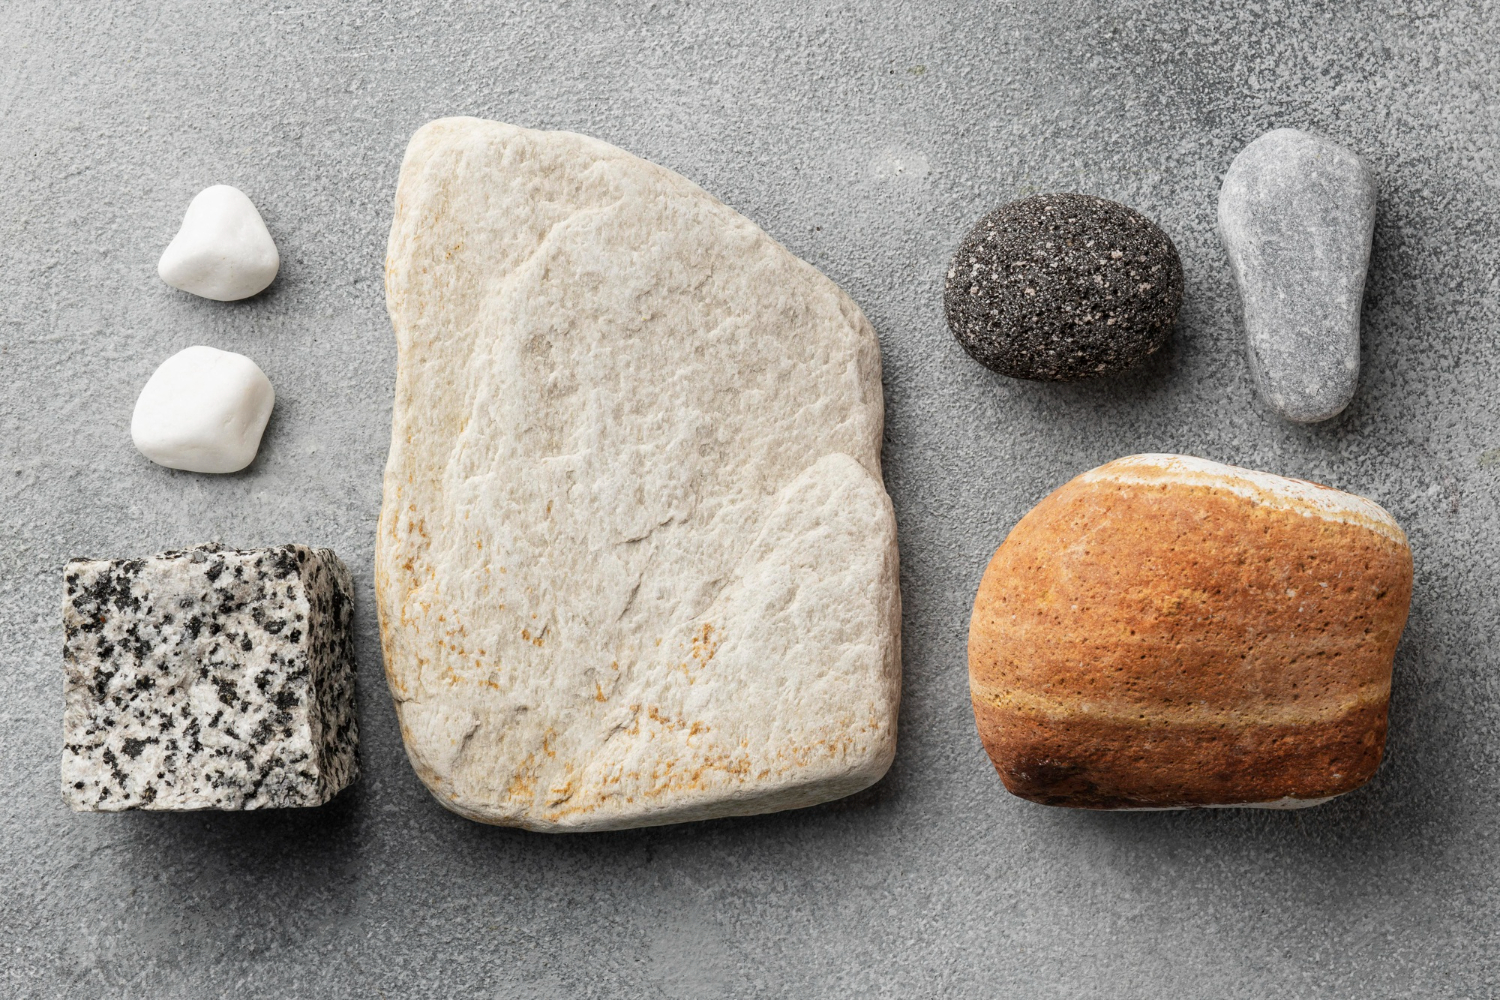 Decorating with stones – a way to relax